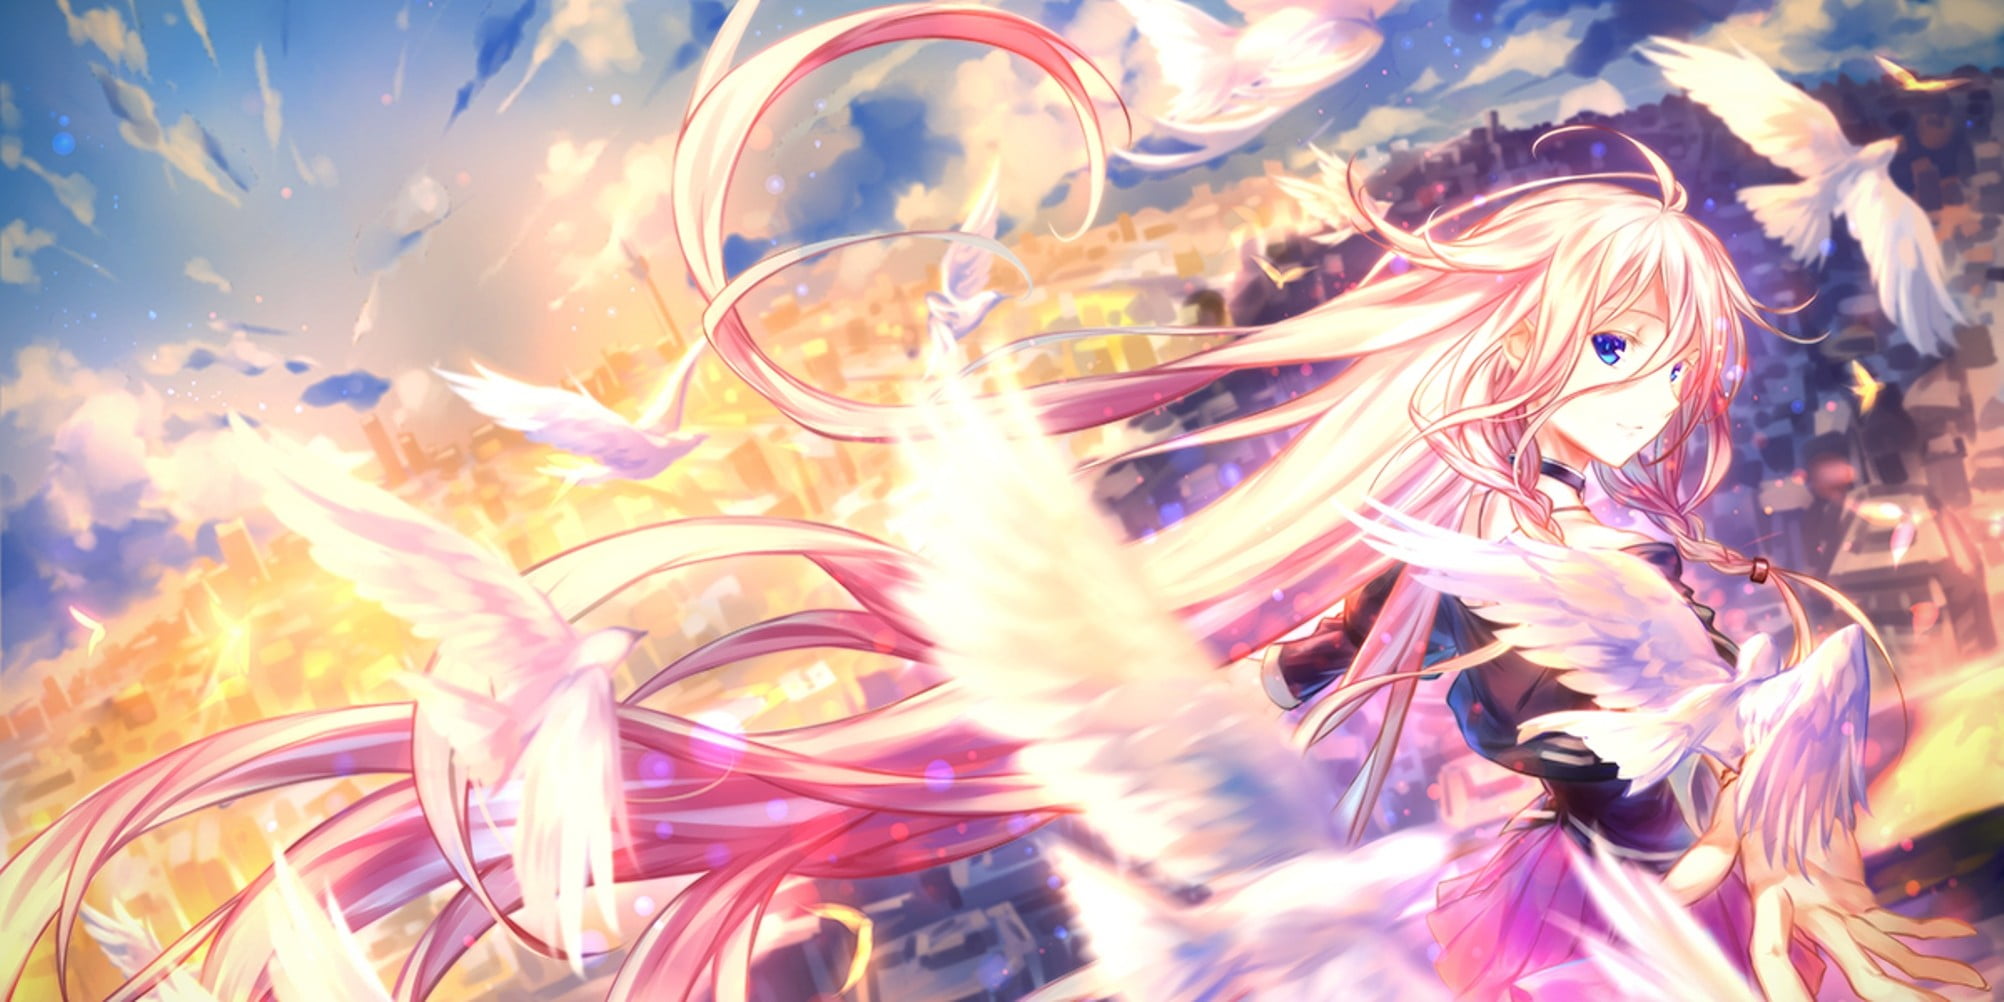 Pink Haired Anime Character Ia Vocaloid Anime Hd Wallpaper Wallpaper Flare